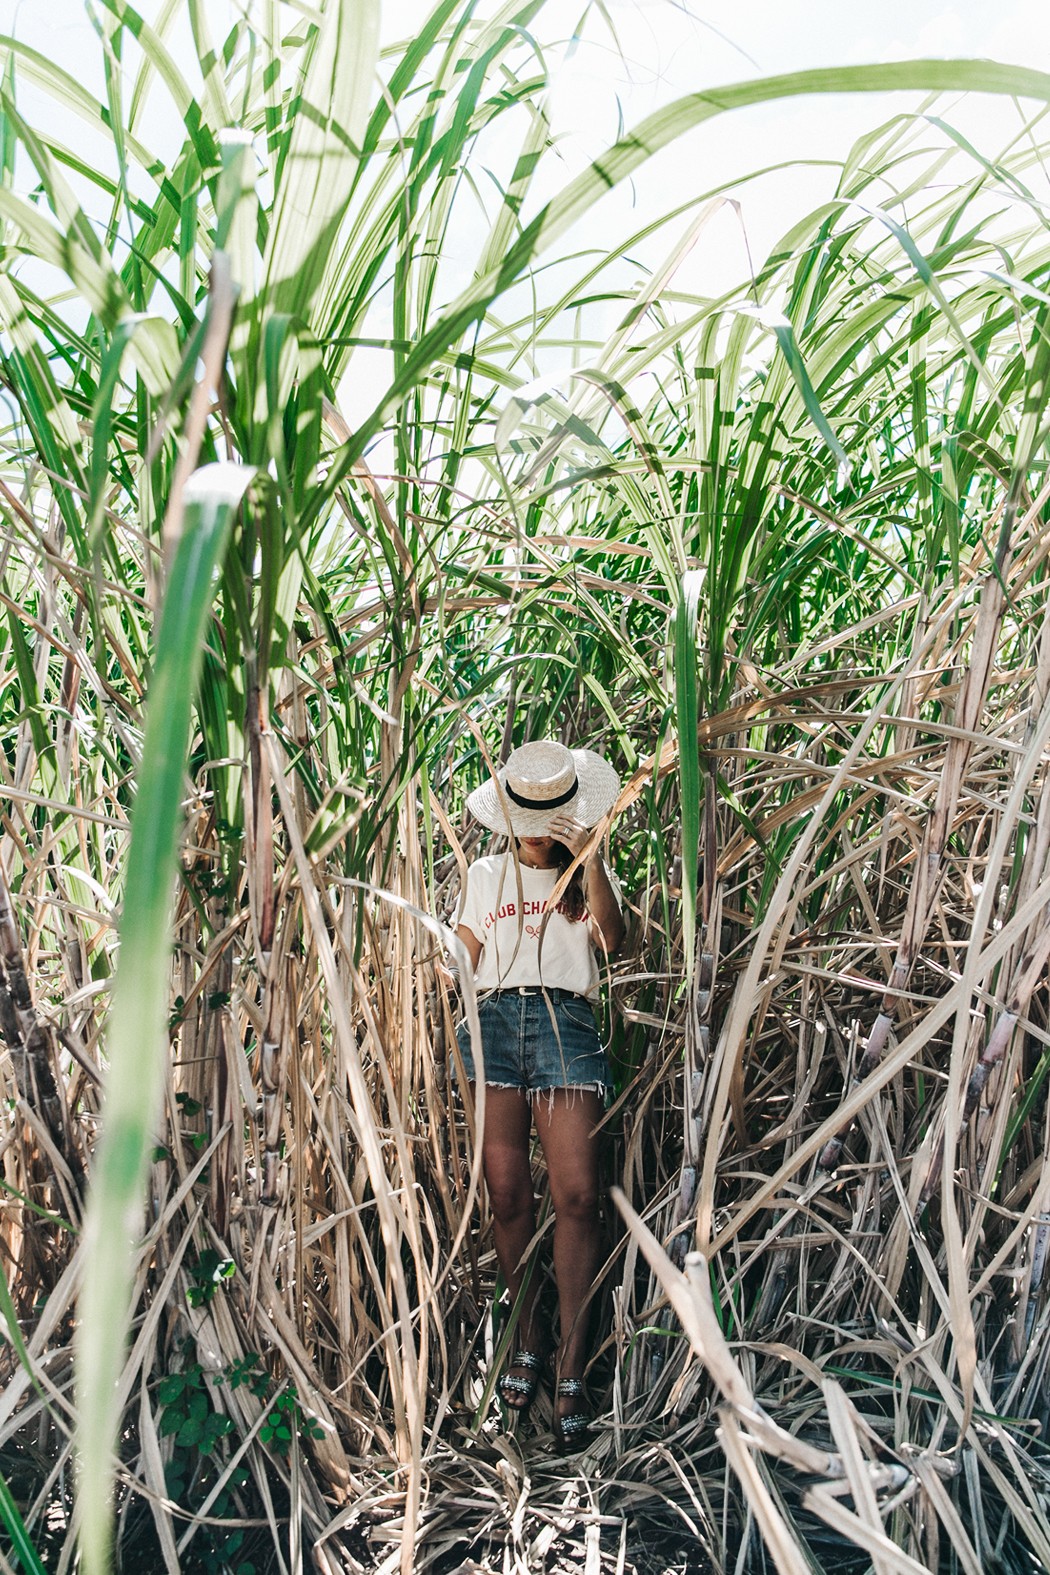 Jamica-Sugar_Cane_Field-Levis-Straw_Hat-Reebok_Tee-Outfit-Summer-Collage_on_The_Road-Bamboo_Walls-20